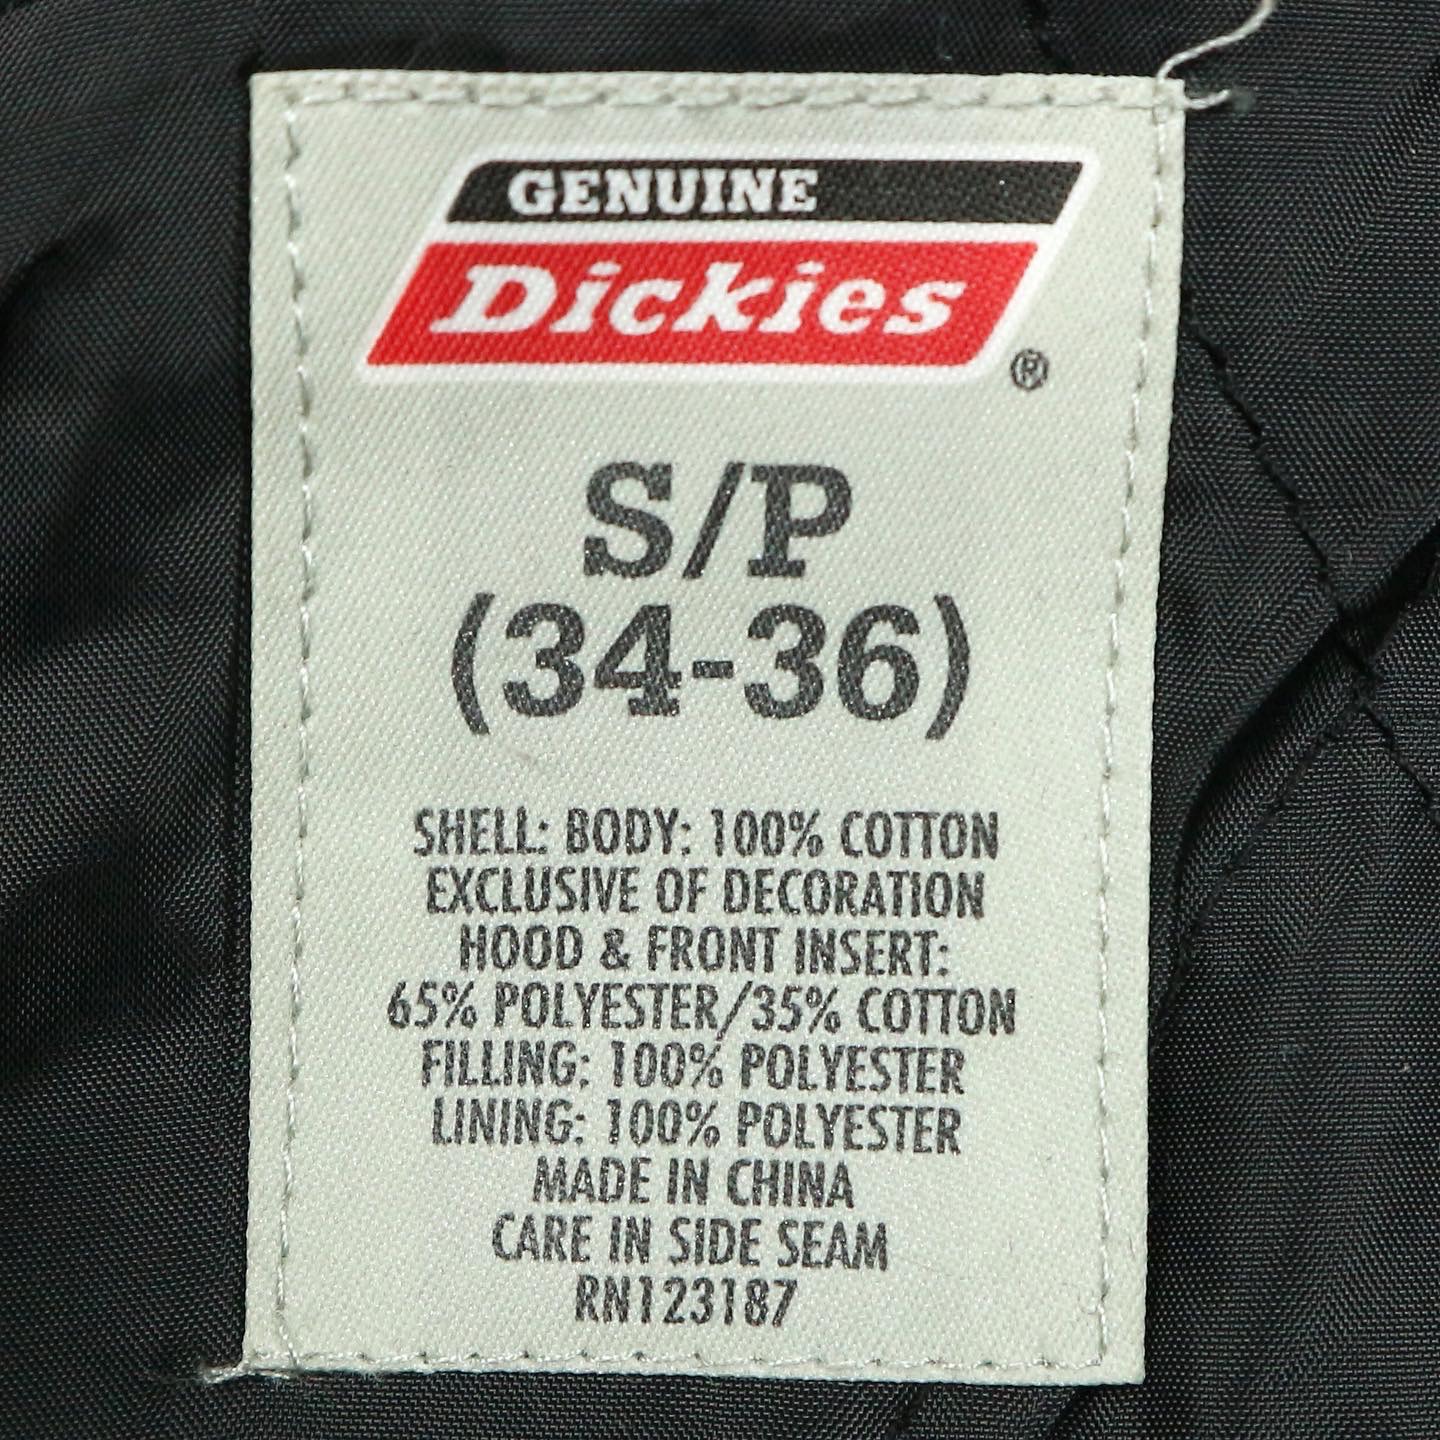 Dickies Camo Hunting Jacket Size M